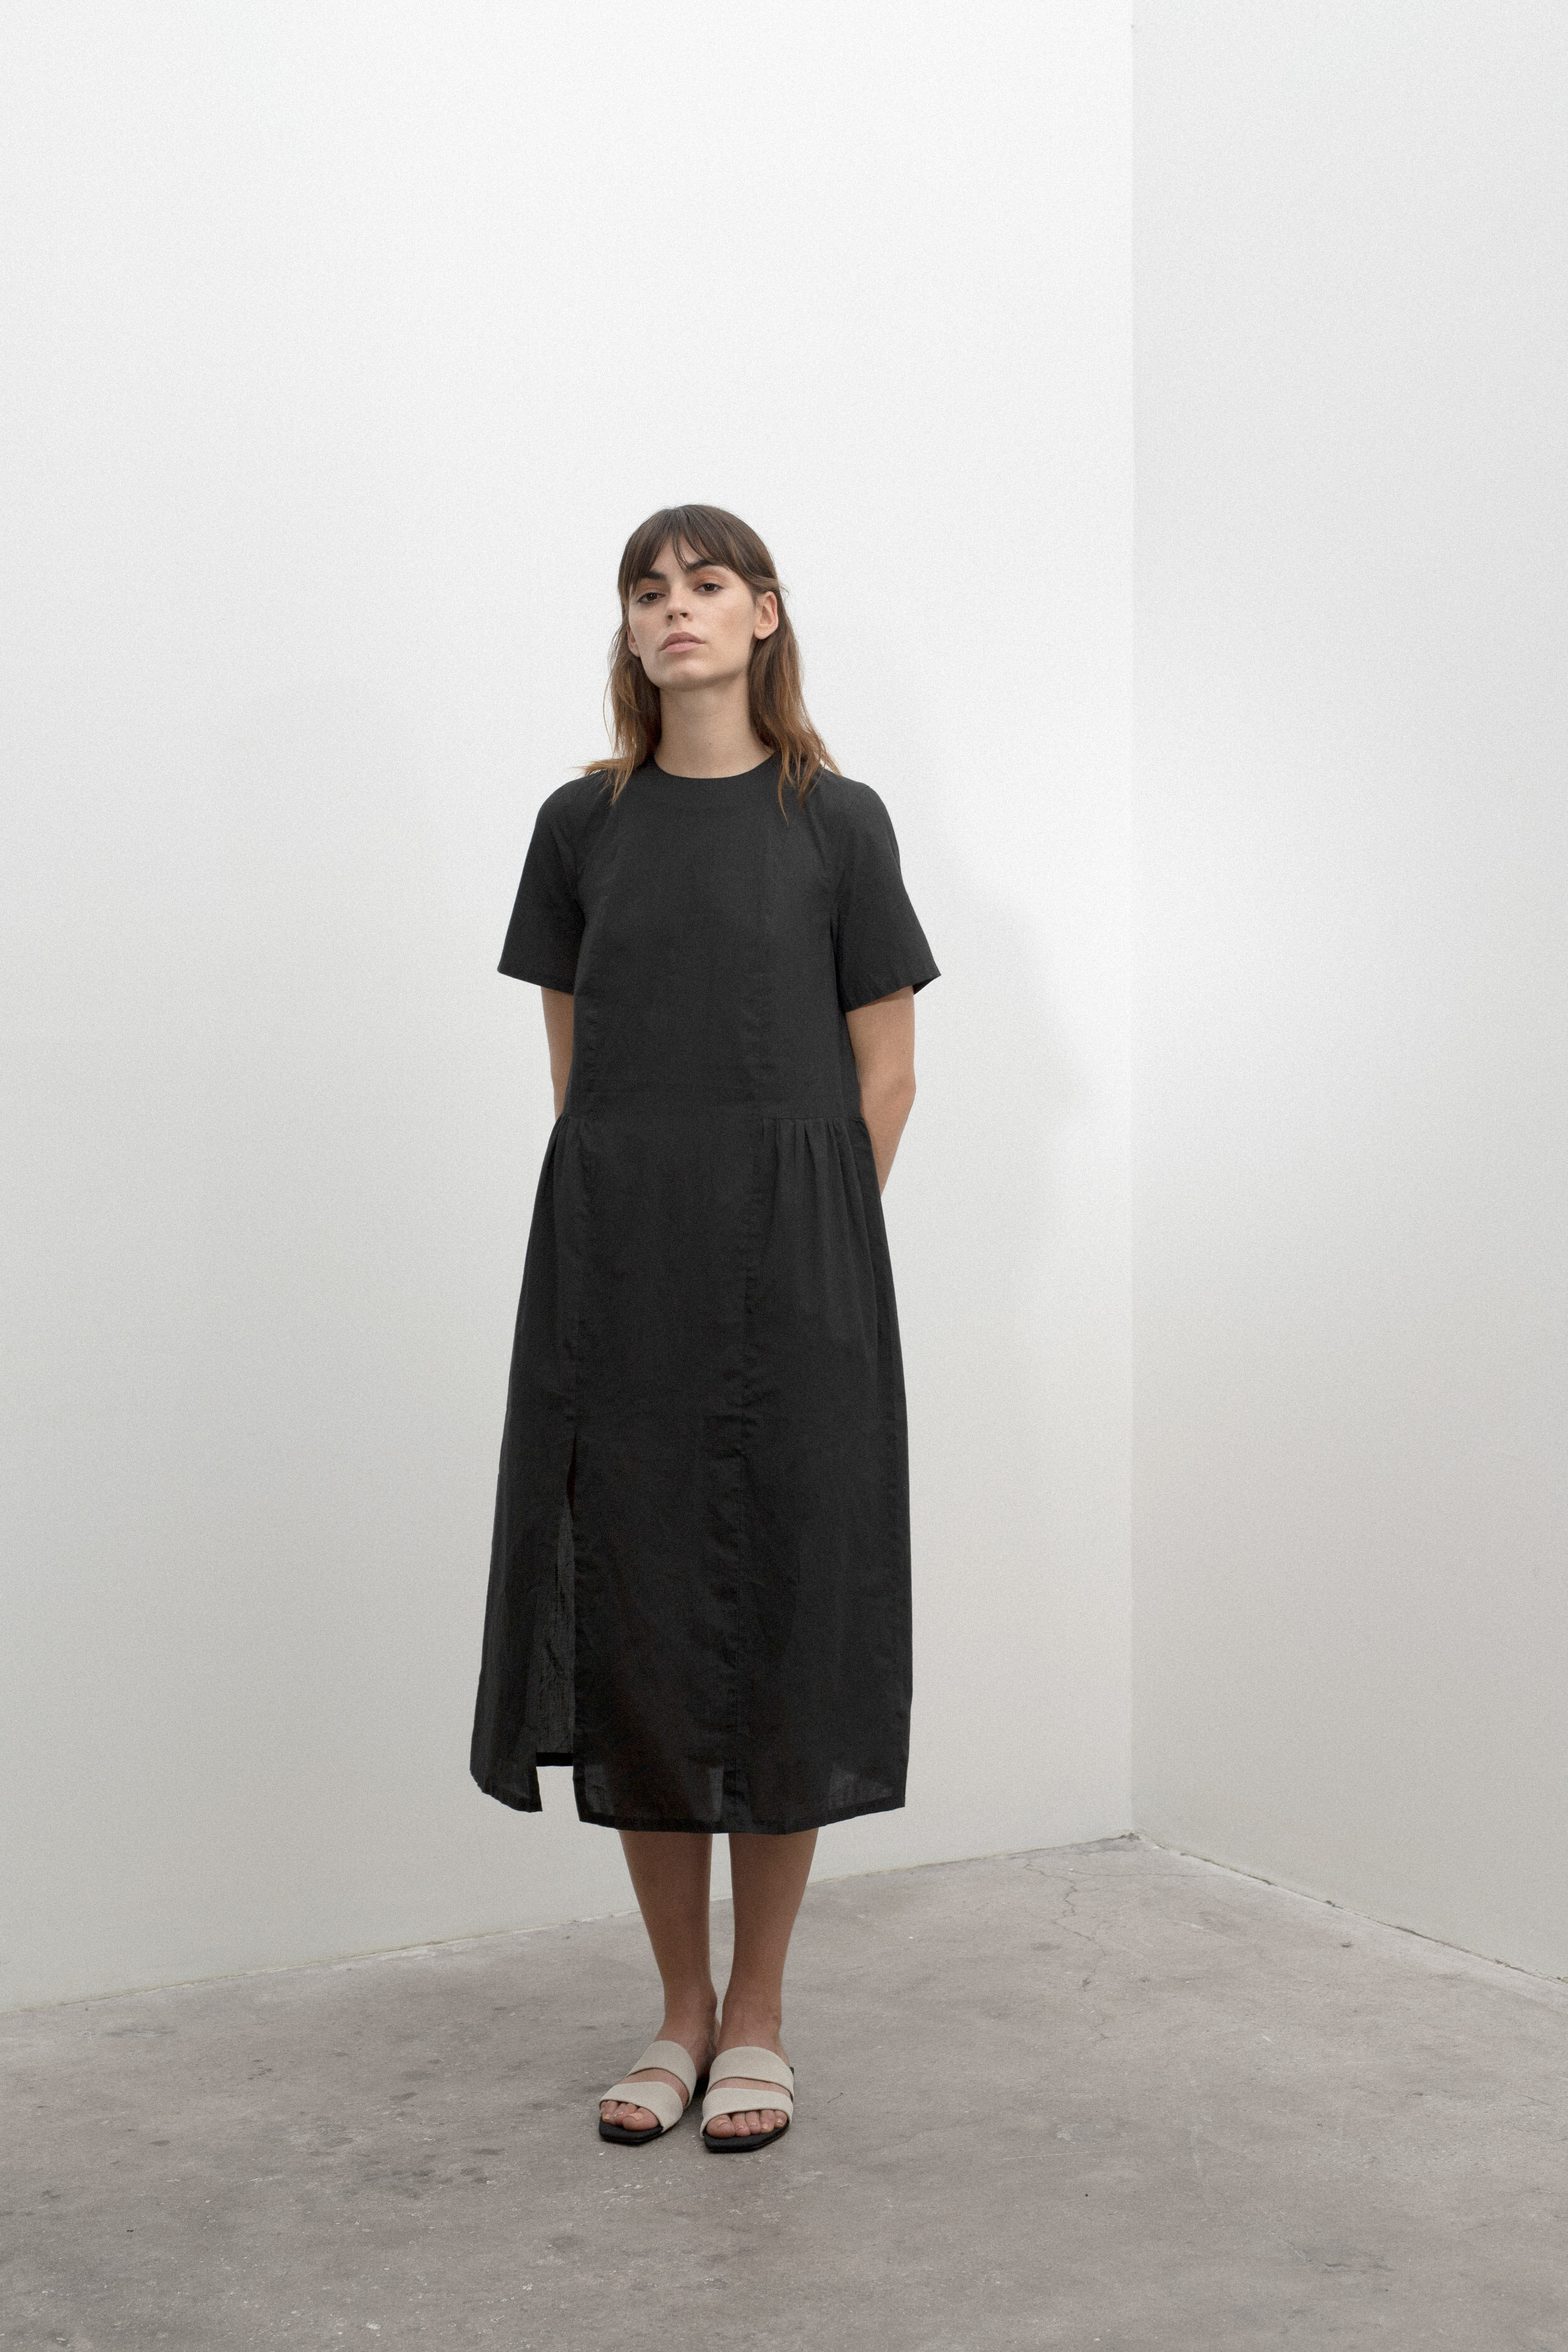 Norse Projects Women's Spring/Summer '20 — eye_C